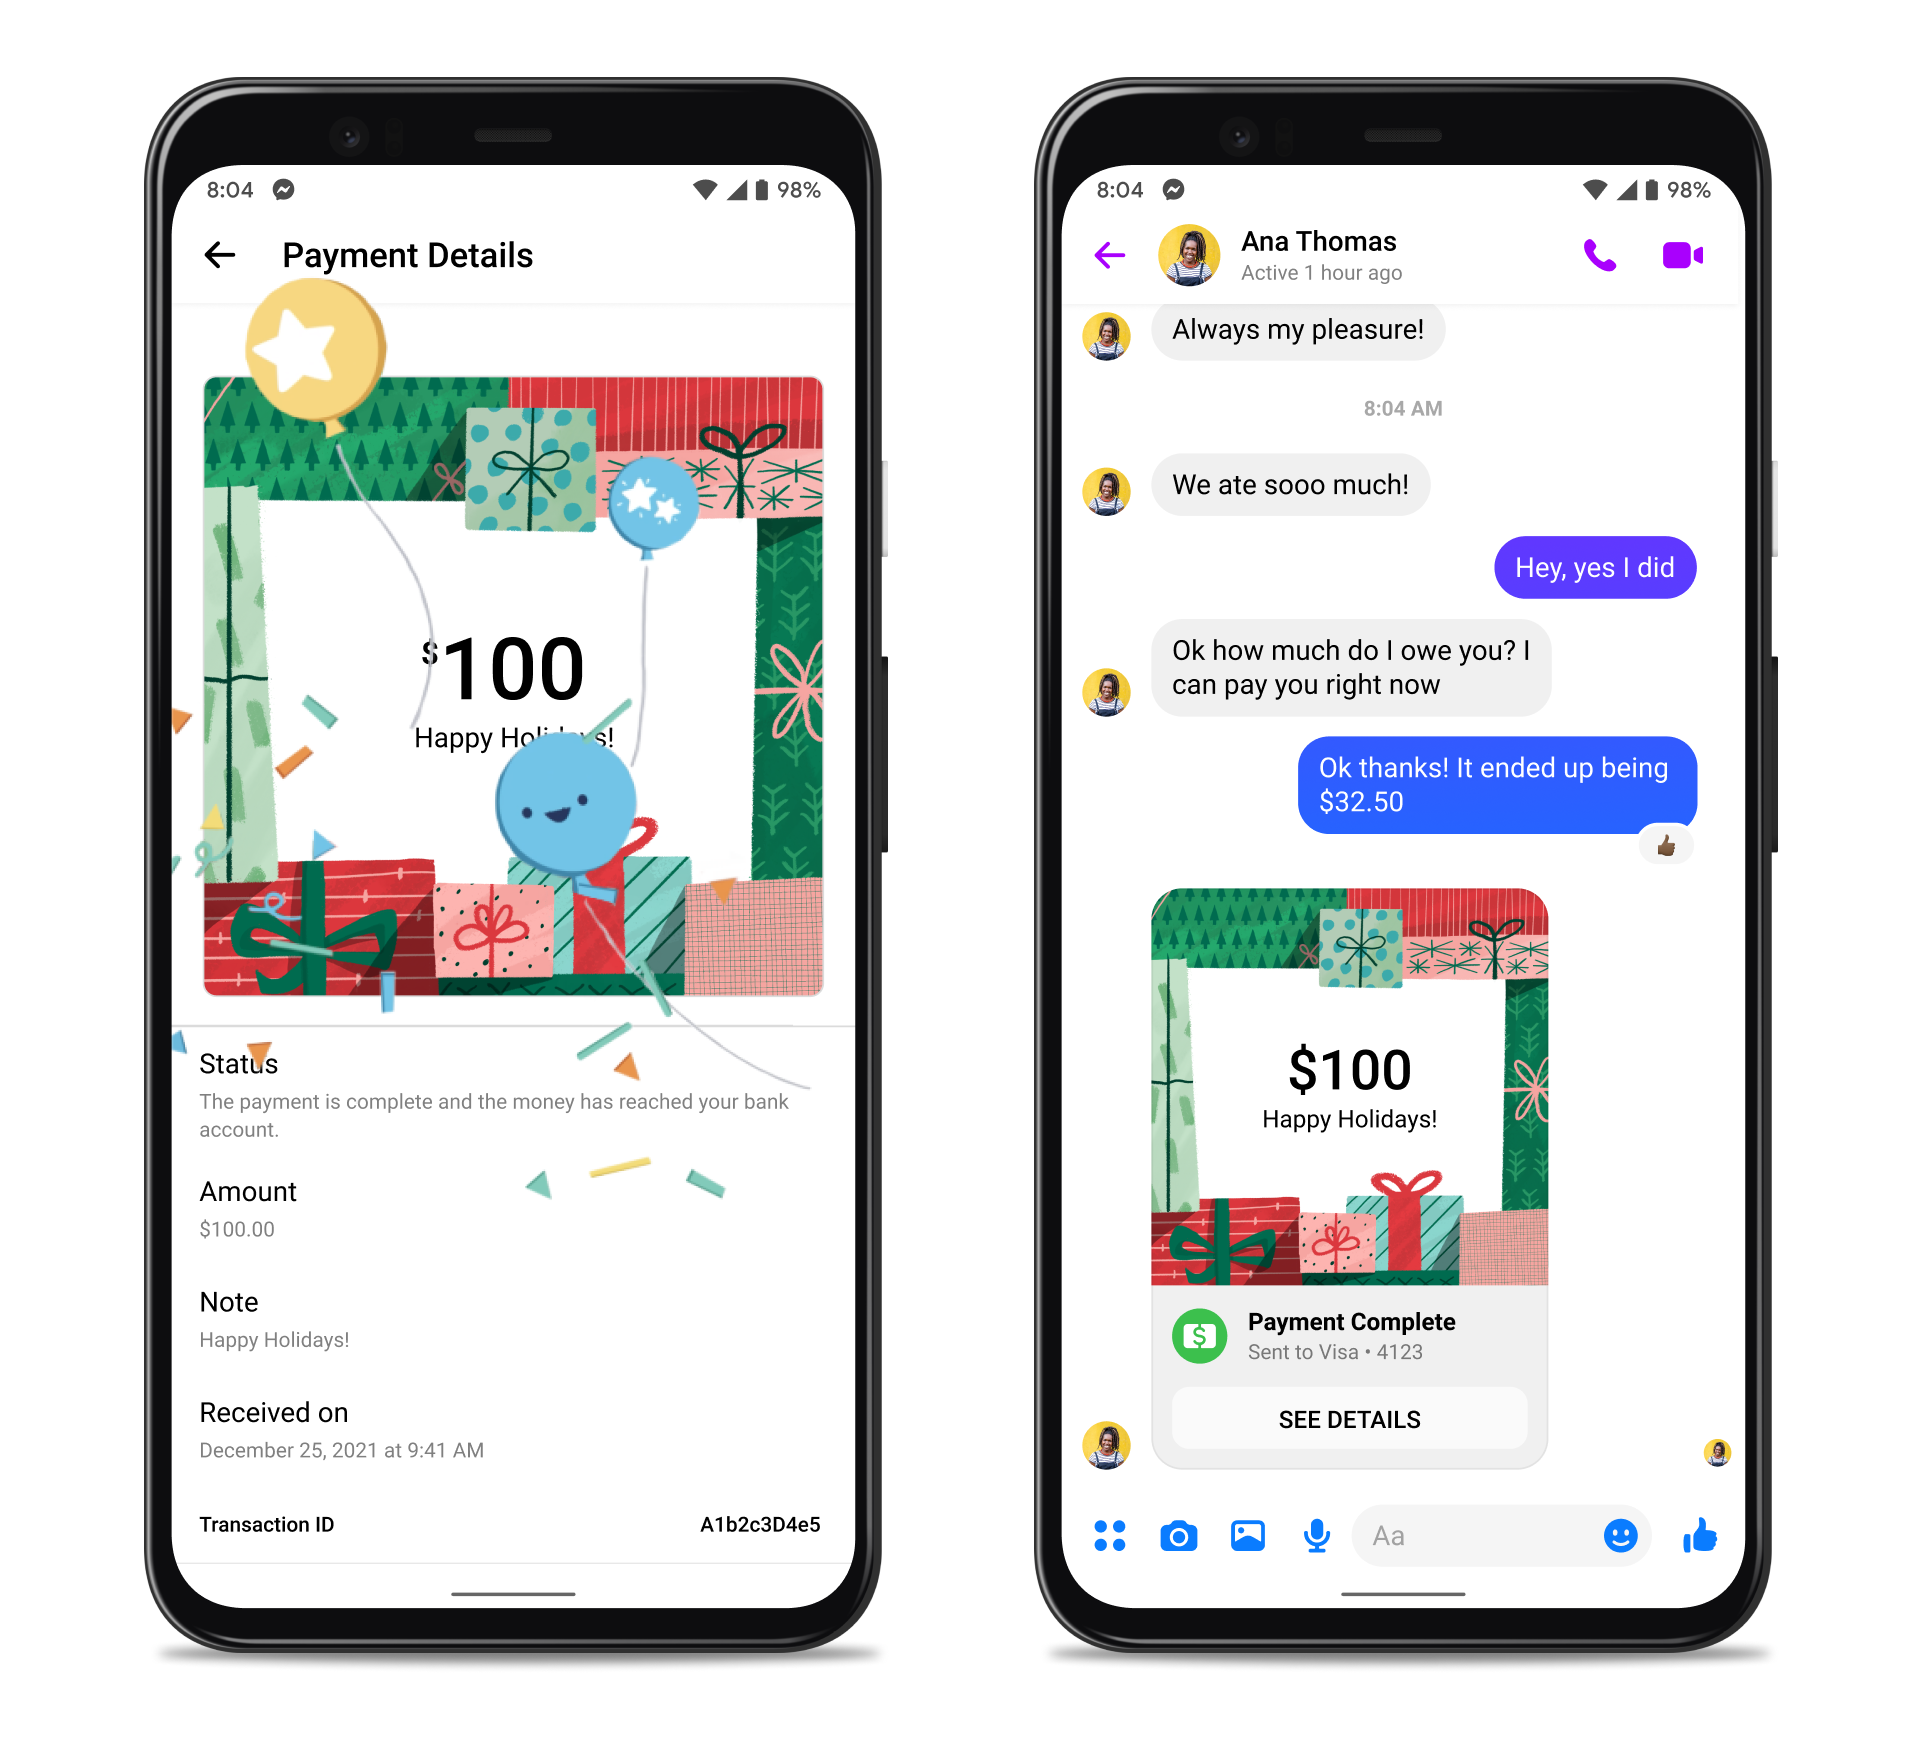 Screenshot of holiday payments on Messenger